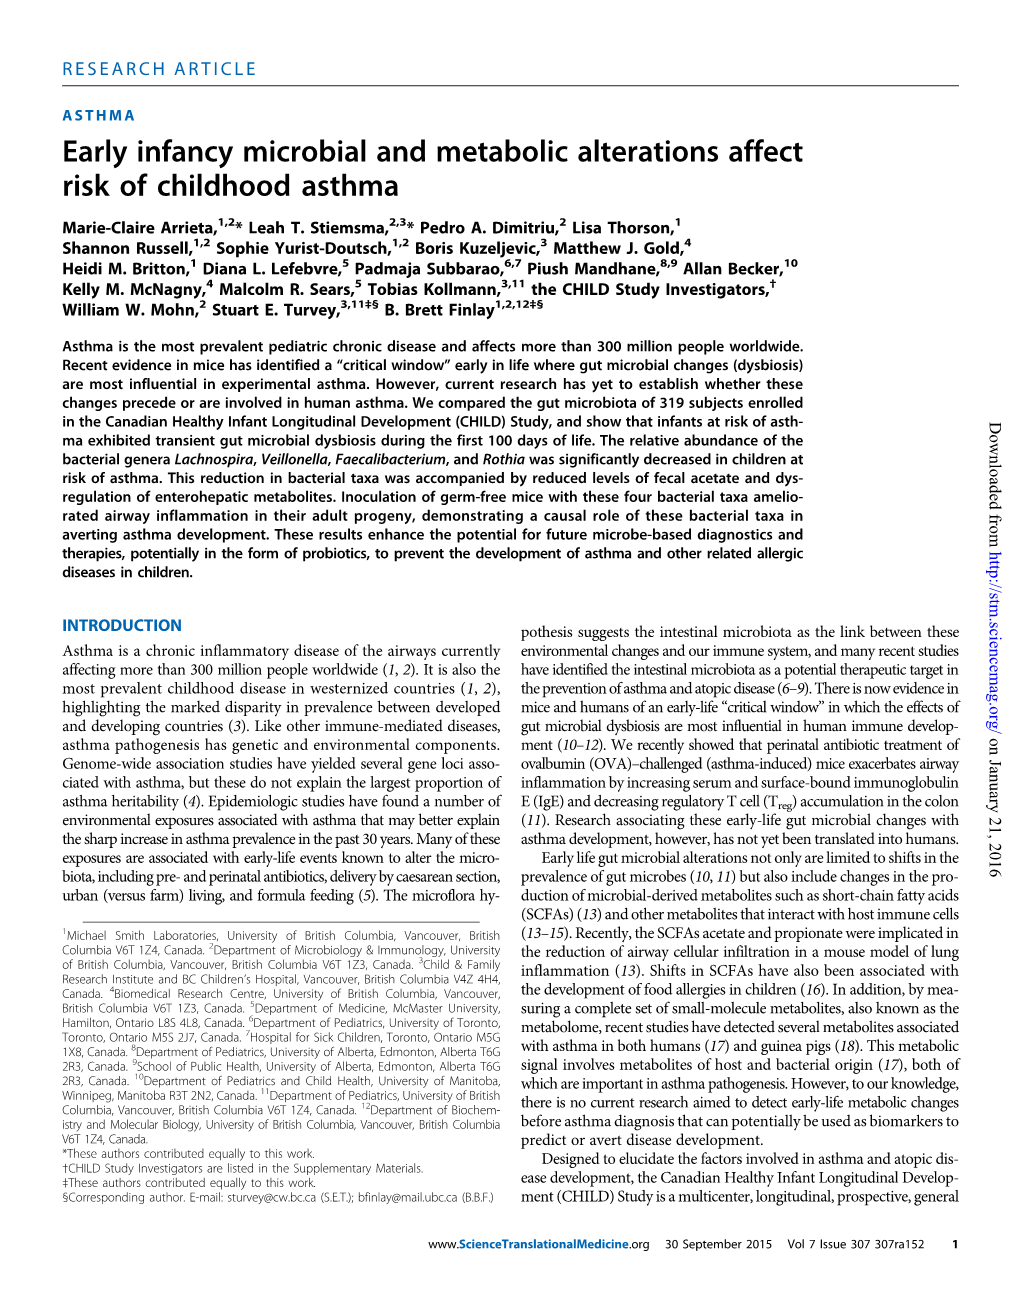 Early Infancy Microbial and Metabolic Alterations Affect Risk of Childhood Asthma